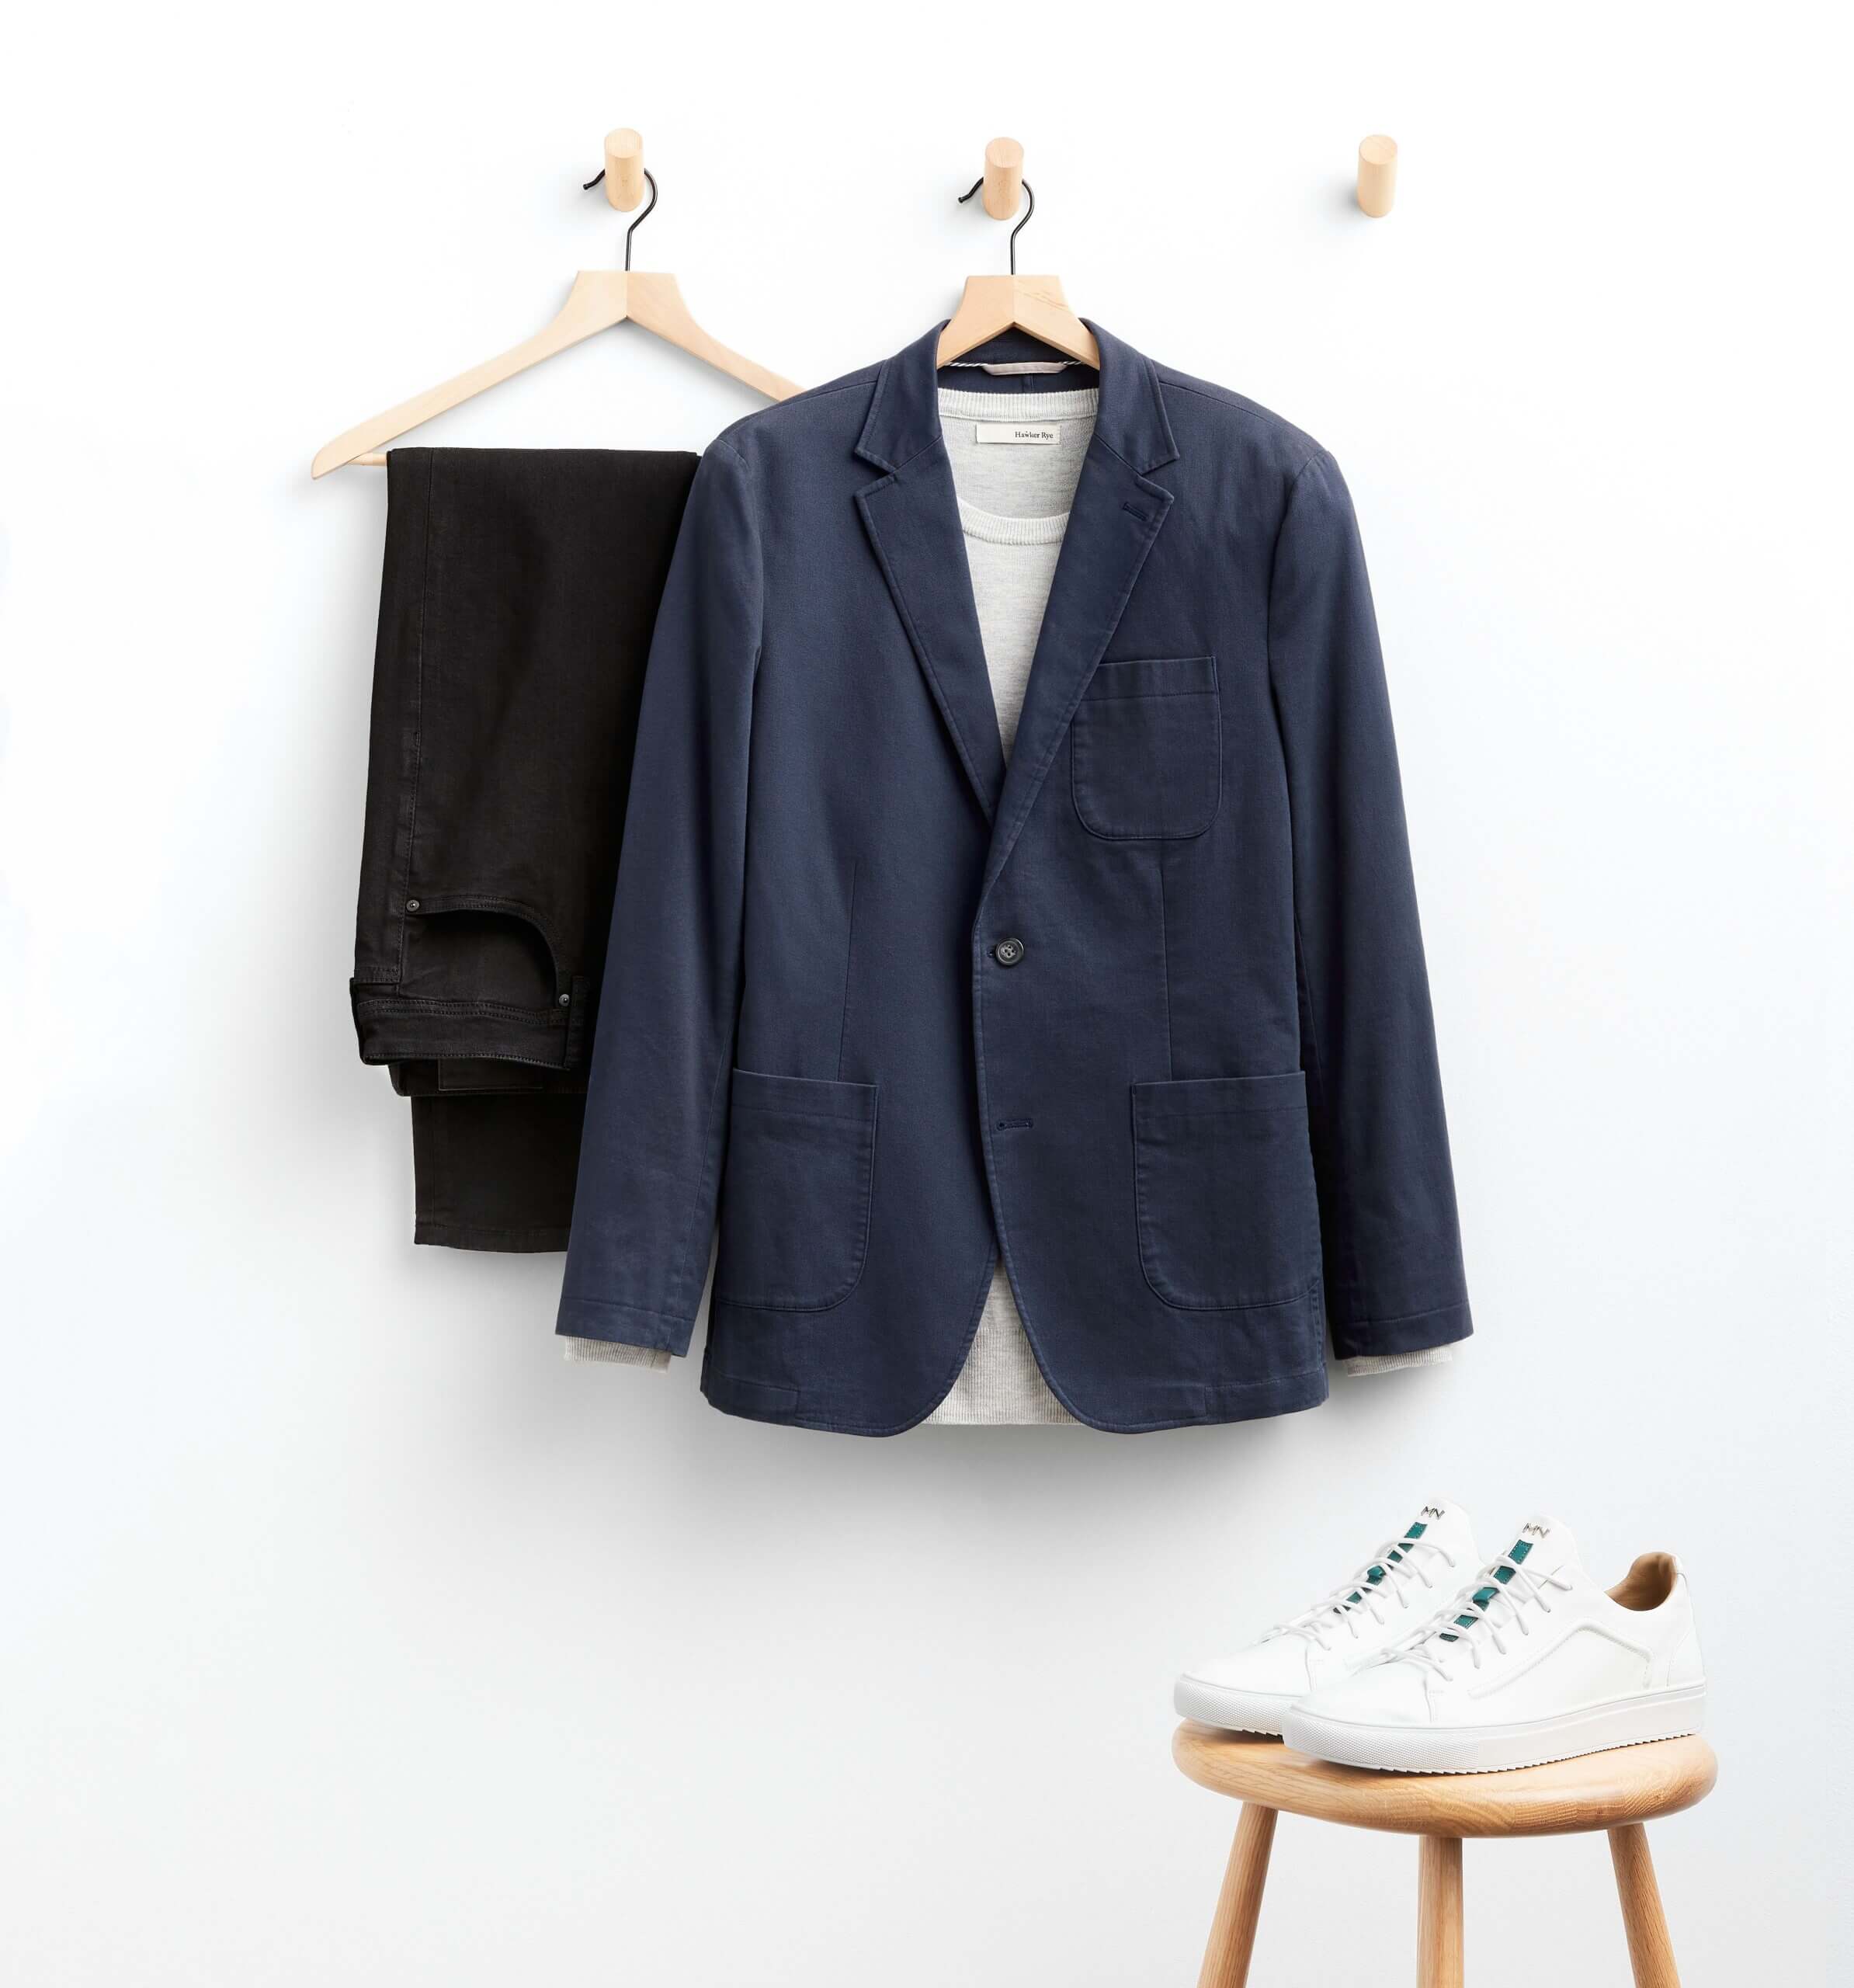 Stitch Fix men’s outfit for shorter men featuring black pants, white shirt and navy blazer hanging next to white court shoes sitting on wood stool.